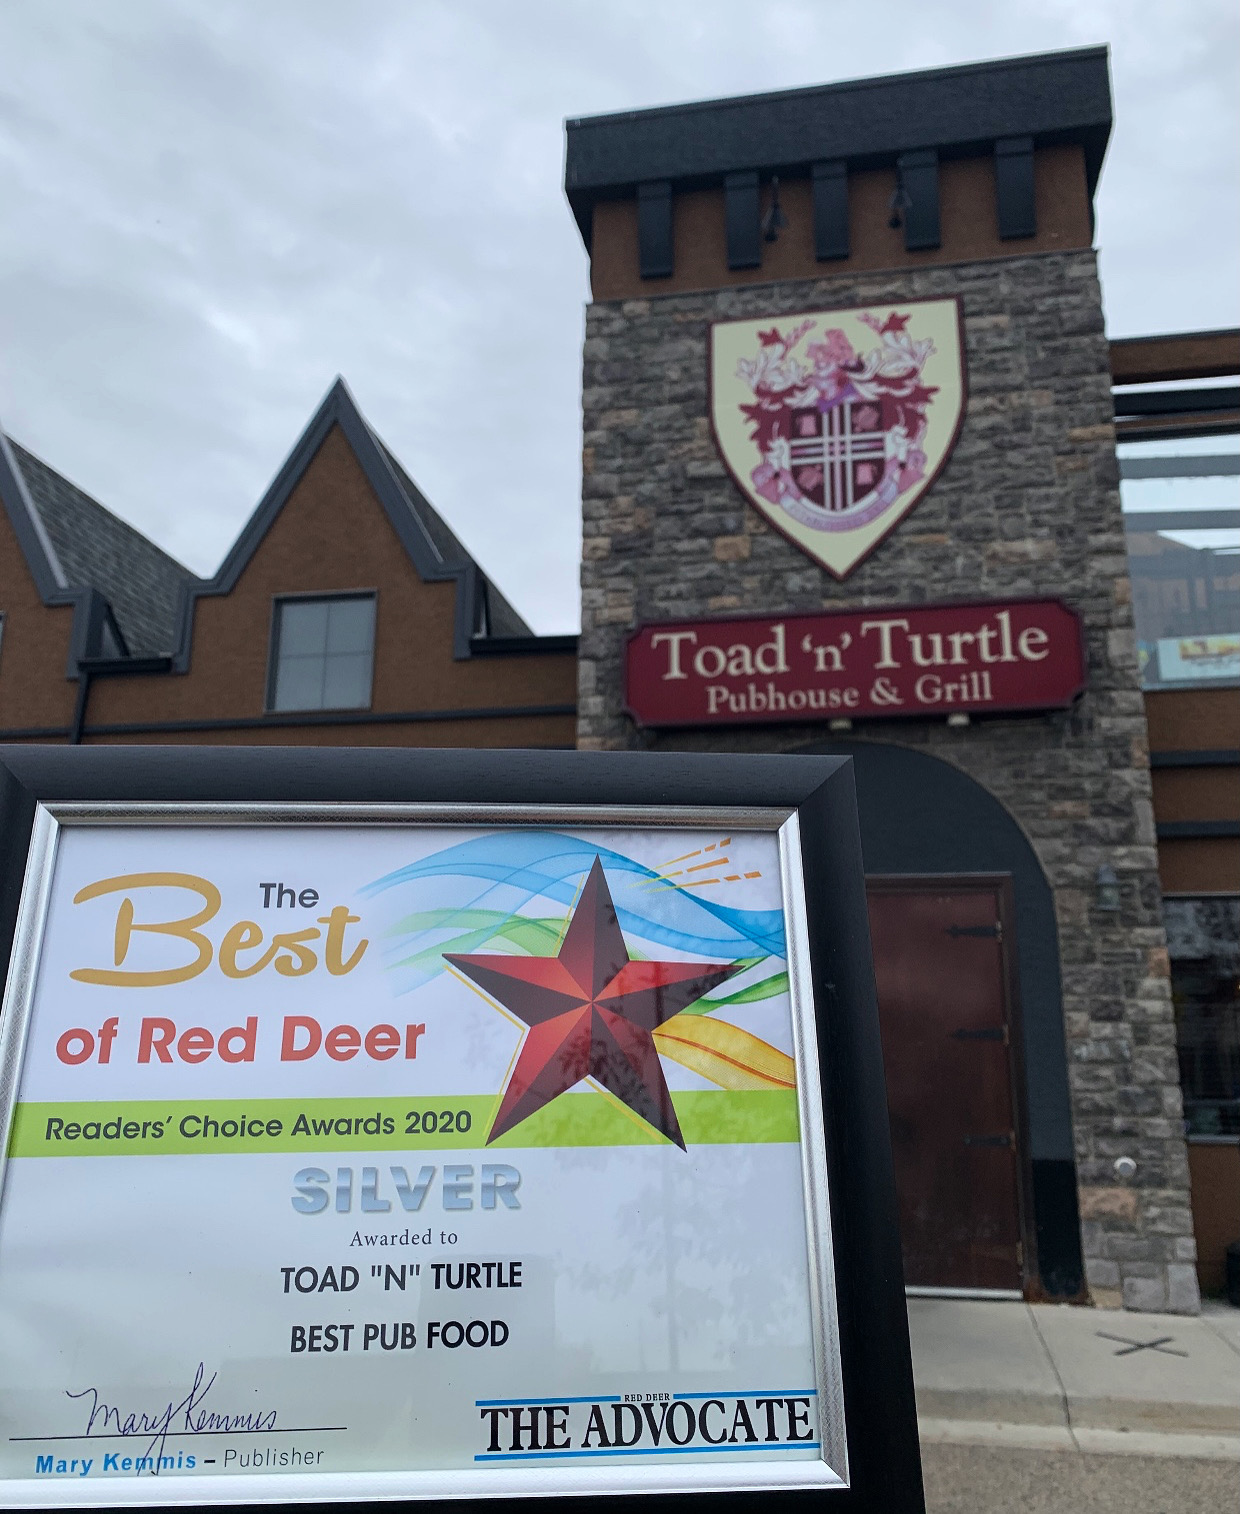 Toad 'n' Turtle Pubhouse & Grill – Red Deer Location